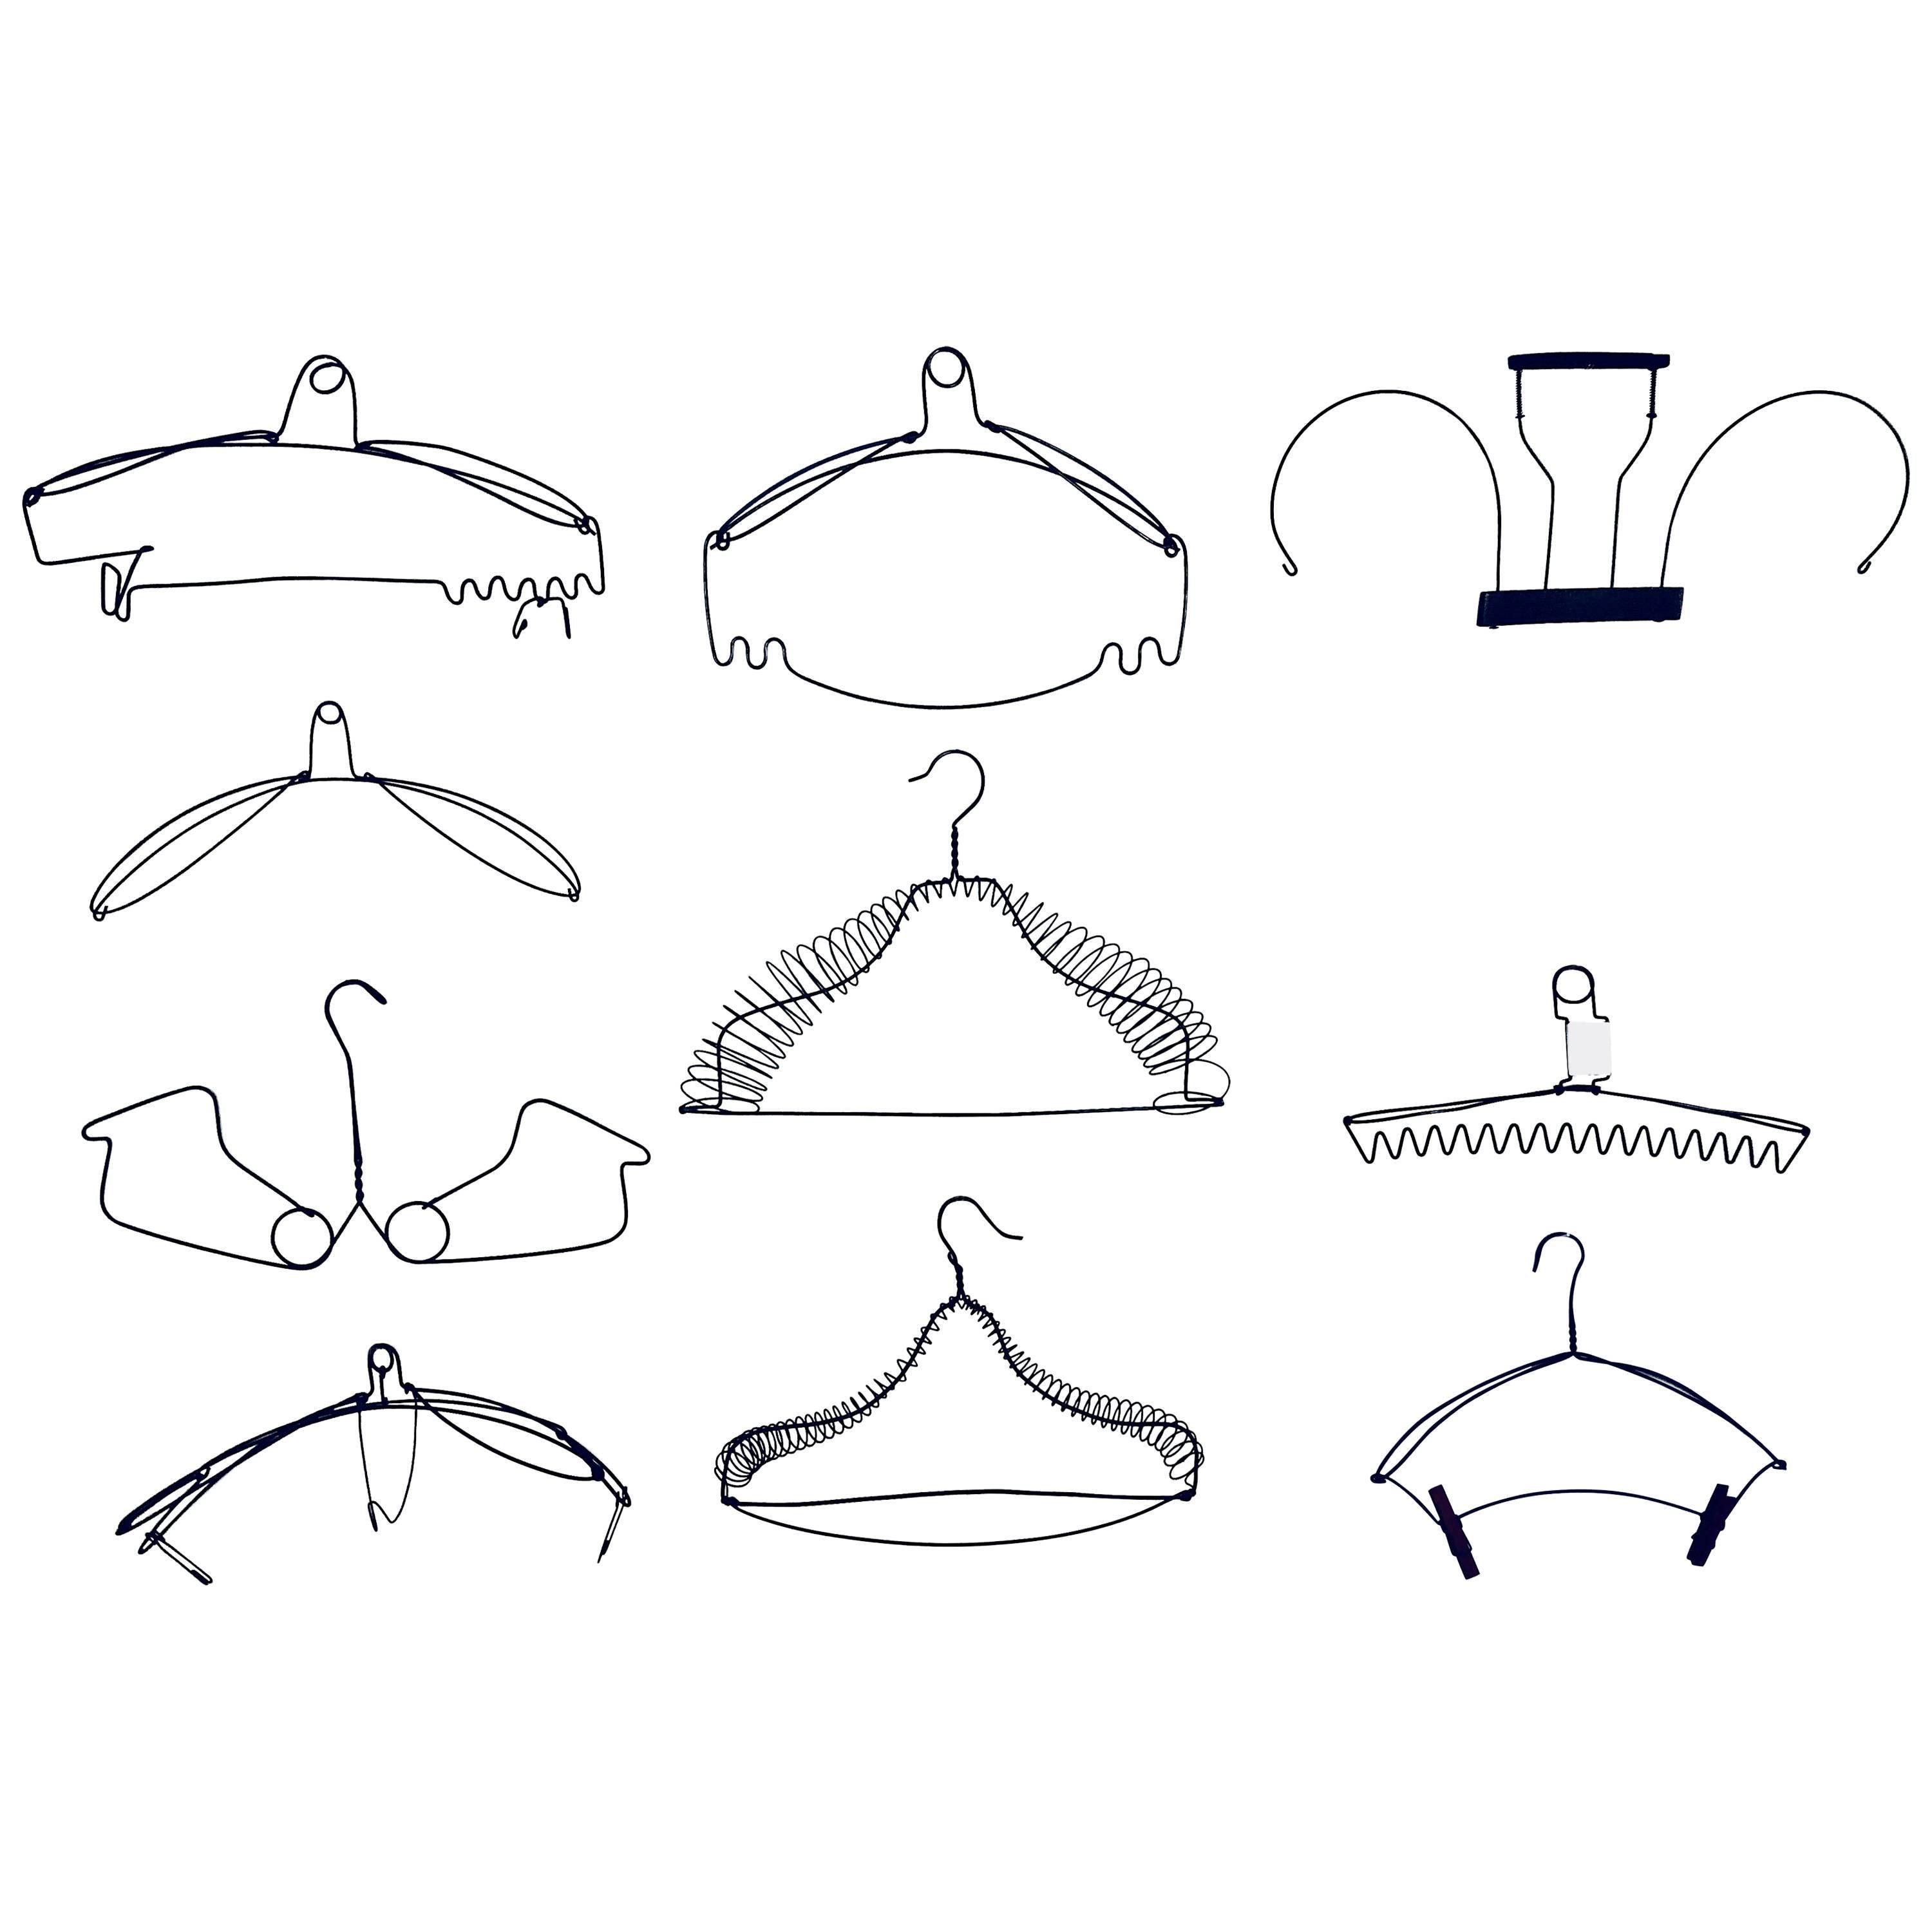 Collection of 11 Antique Wire Hangers